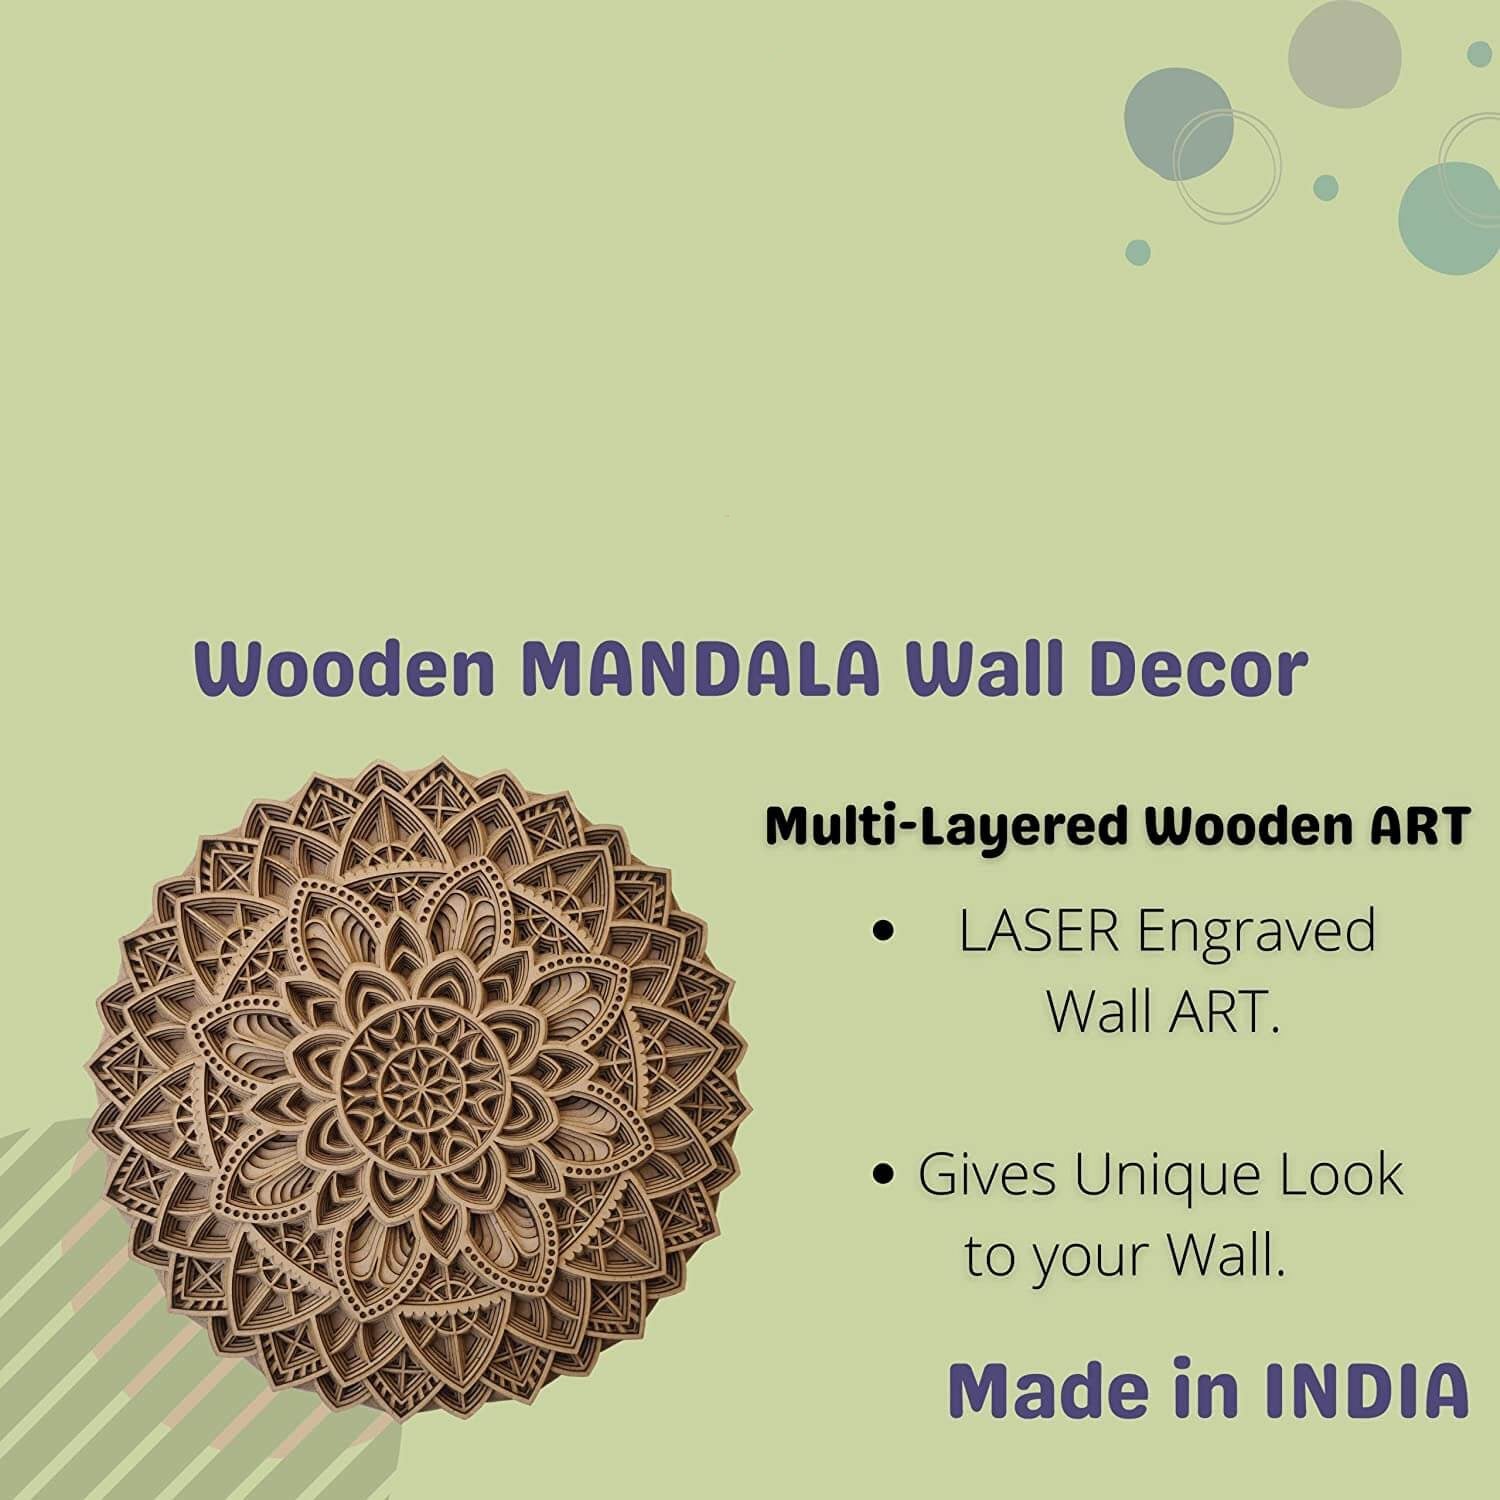 Wooden 3D Laser Cut Multi Layered Decorative Mandala Wall Décor (12 x 12 Inch) Mangal Fashions | Indian Home Decor and Craft